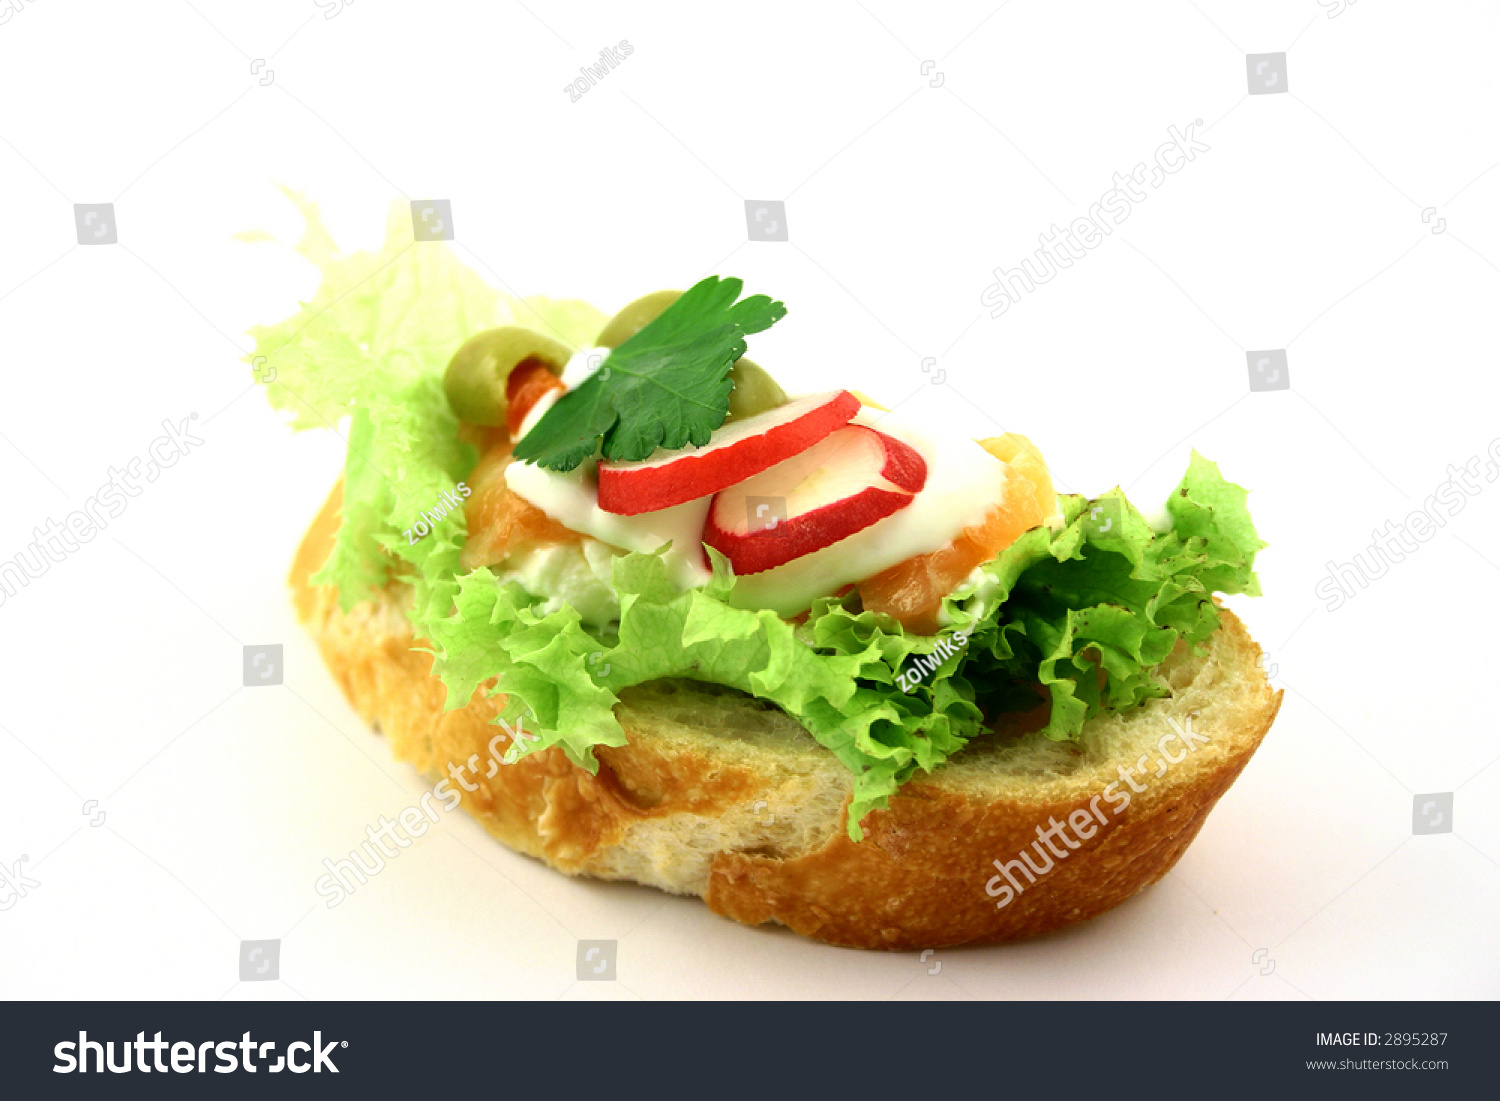 Fresh Sandwich With Salmon And Egg On The Iceberg Lettuce Stock Photo ...